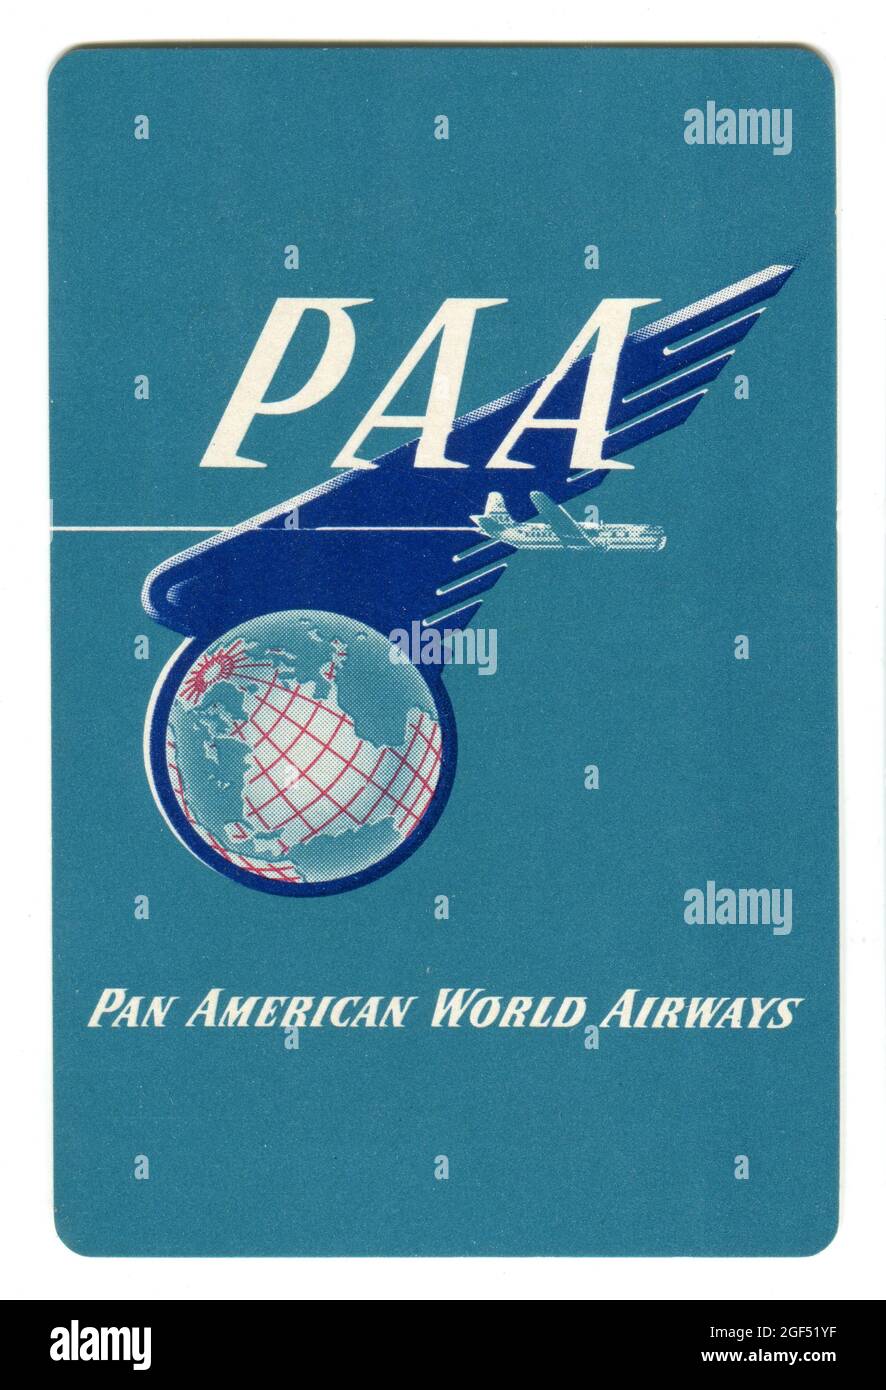 A playing card dating from the early 1950s promoting Pan American World Airways. The design depicts a Pan Am Boeing 377 Stratocruiser airliner flying in front of the company logo. Stock Photo